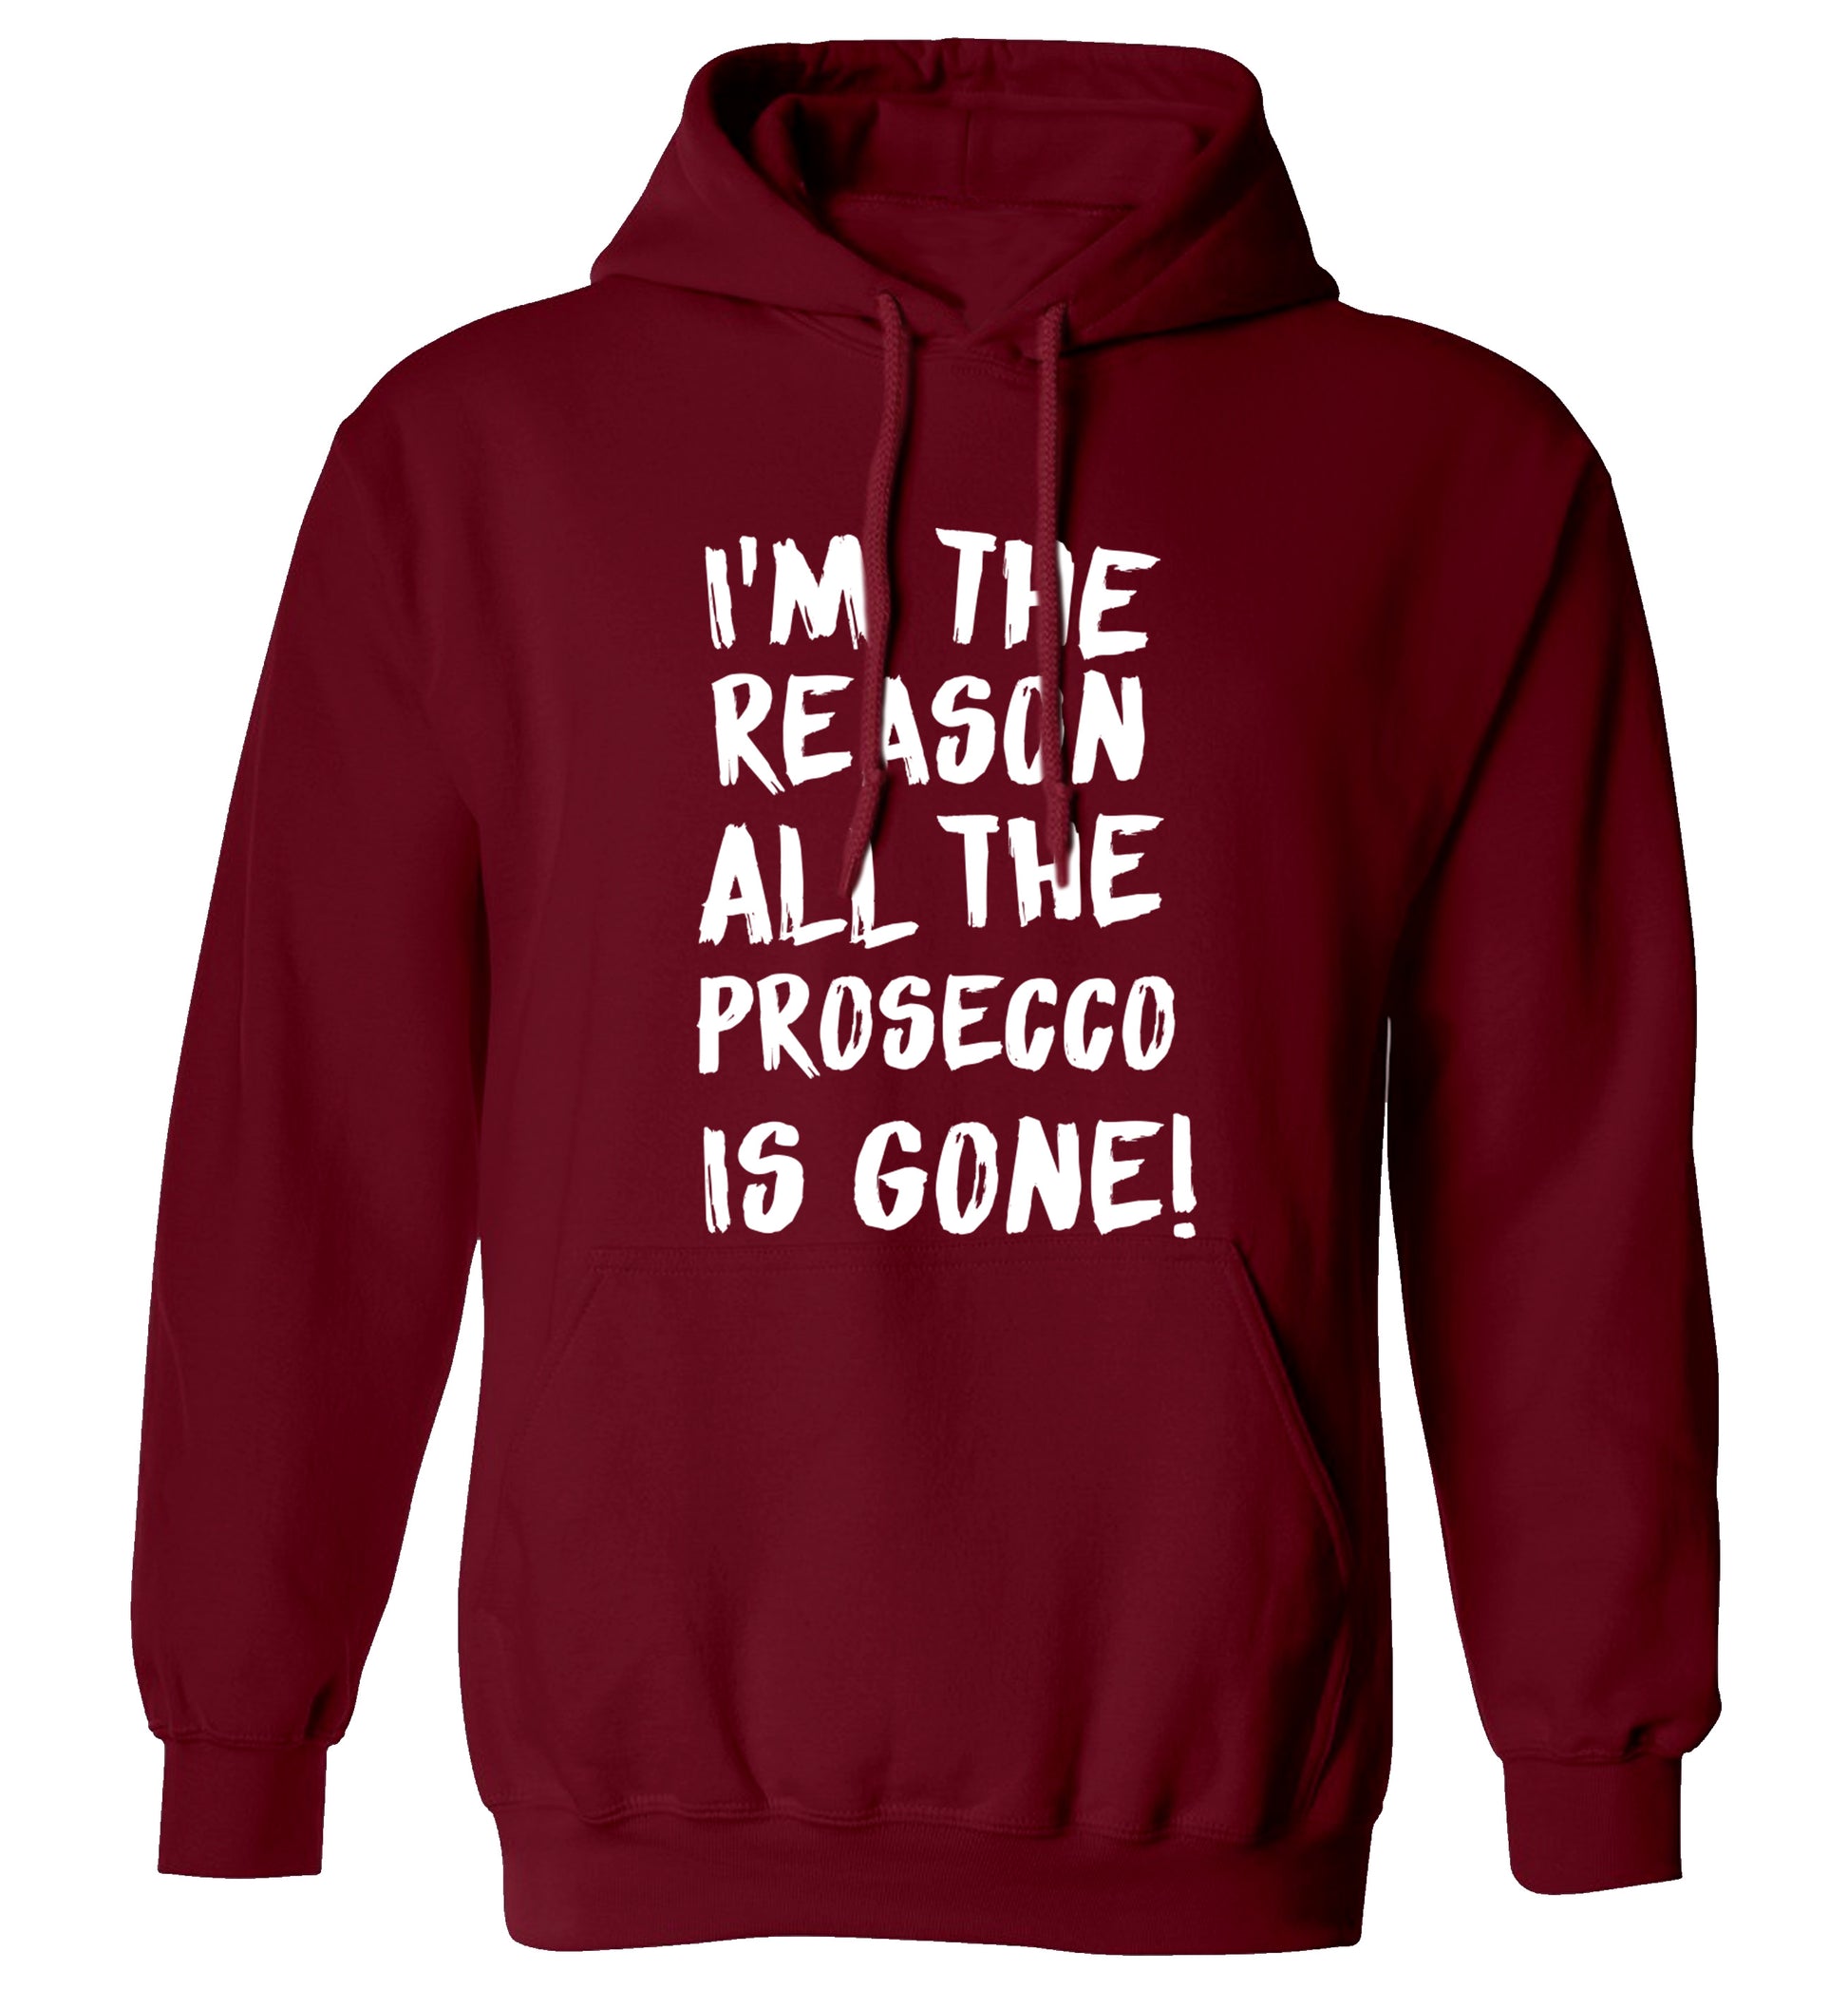 I'm the reason all the prosecco is gone adults unisex maroon hoodie 2XL